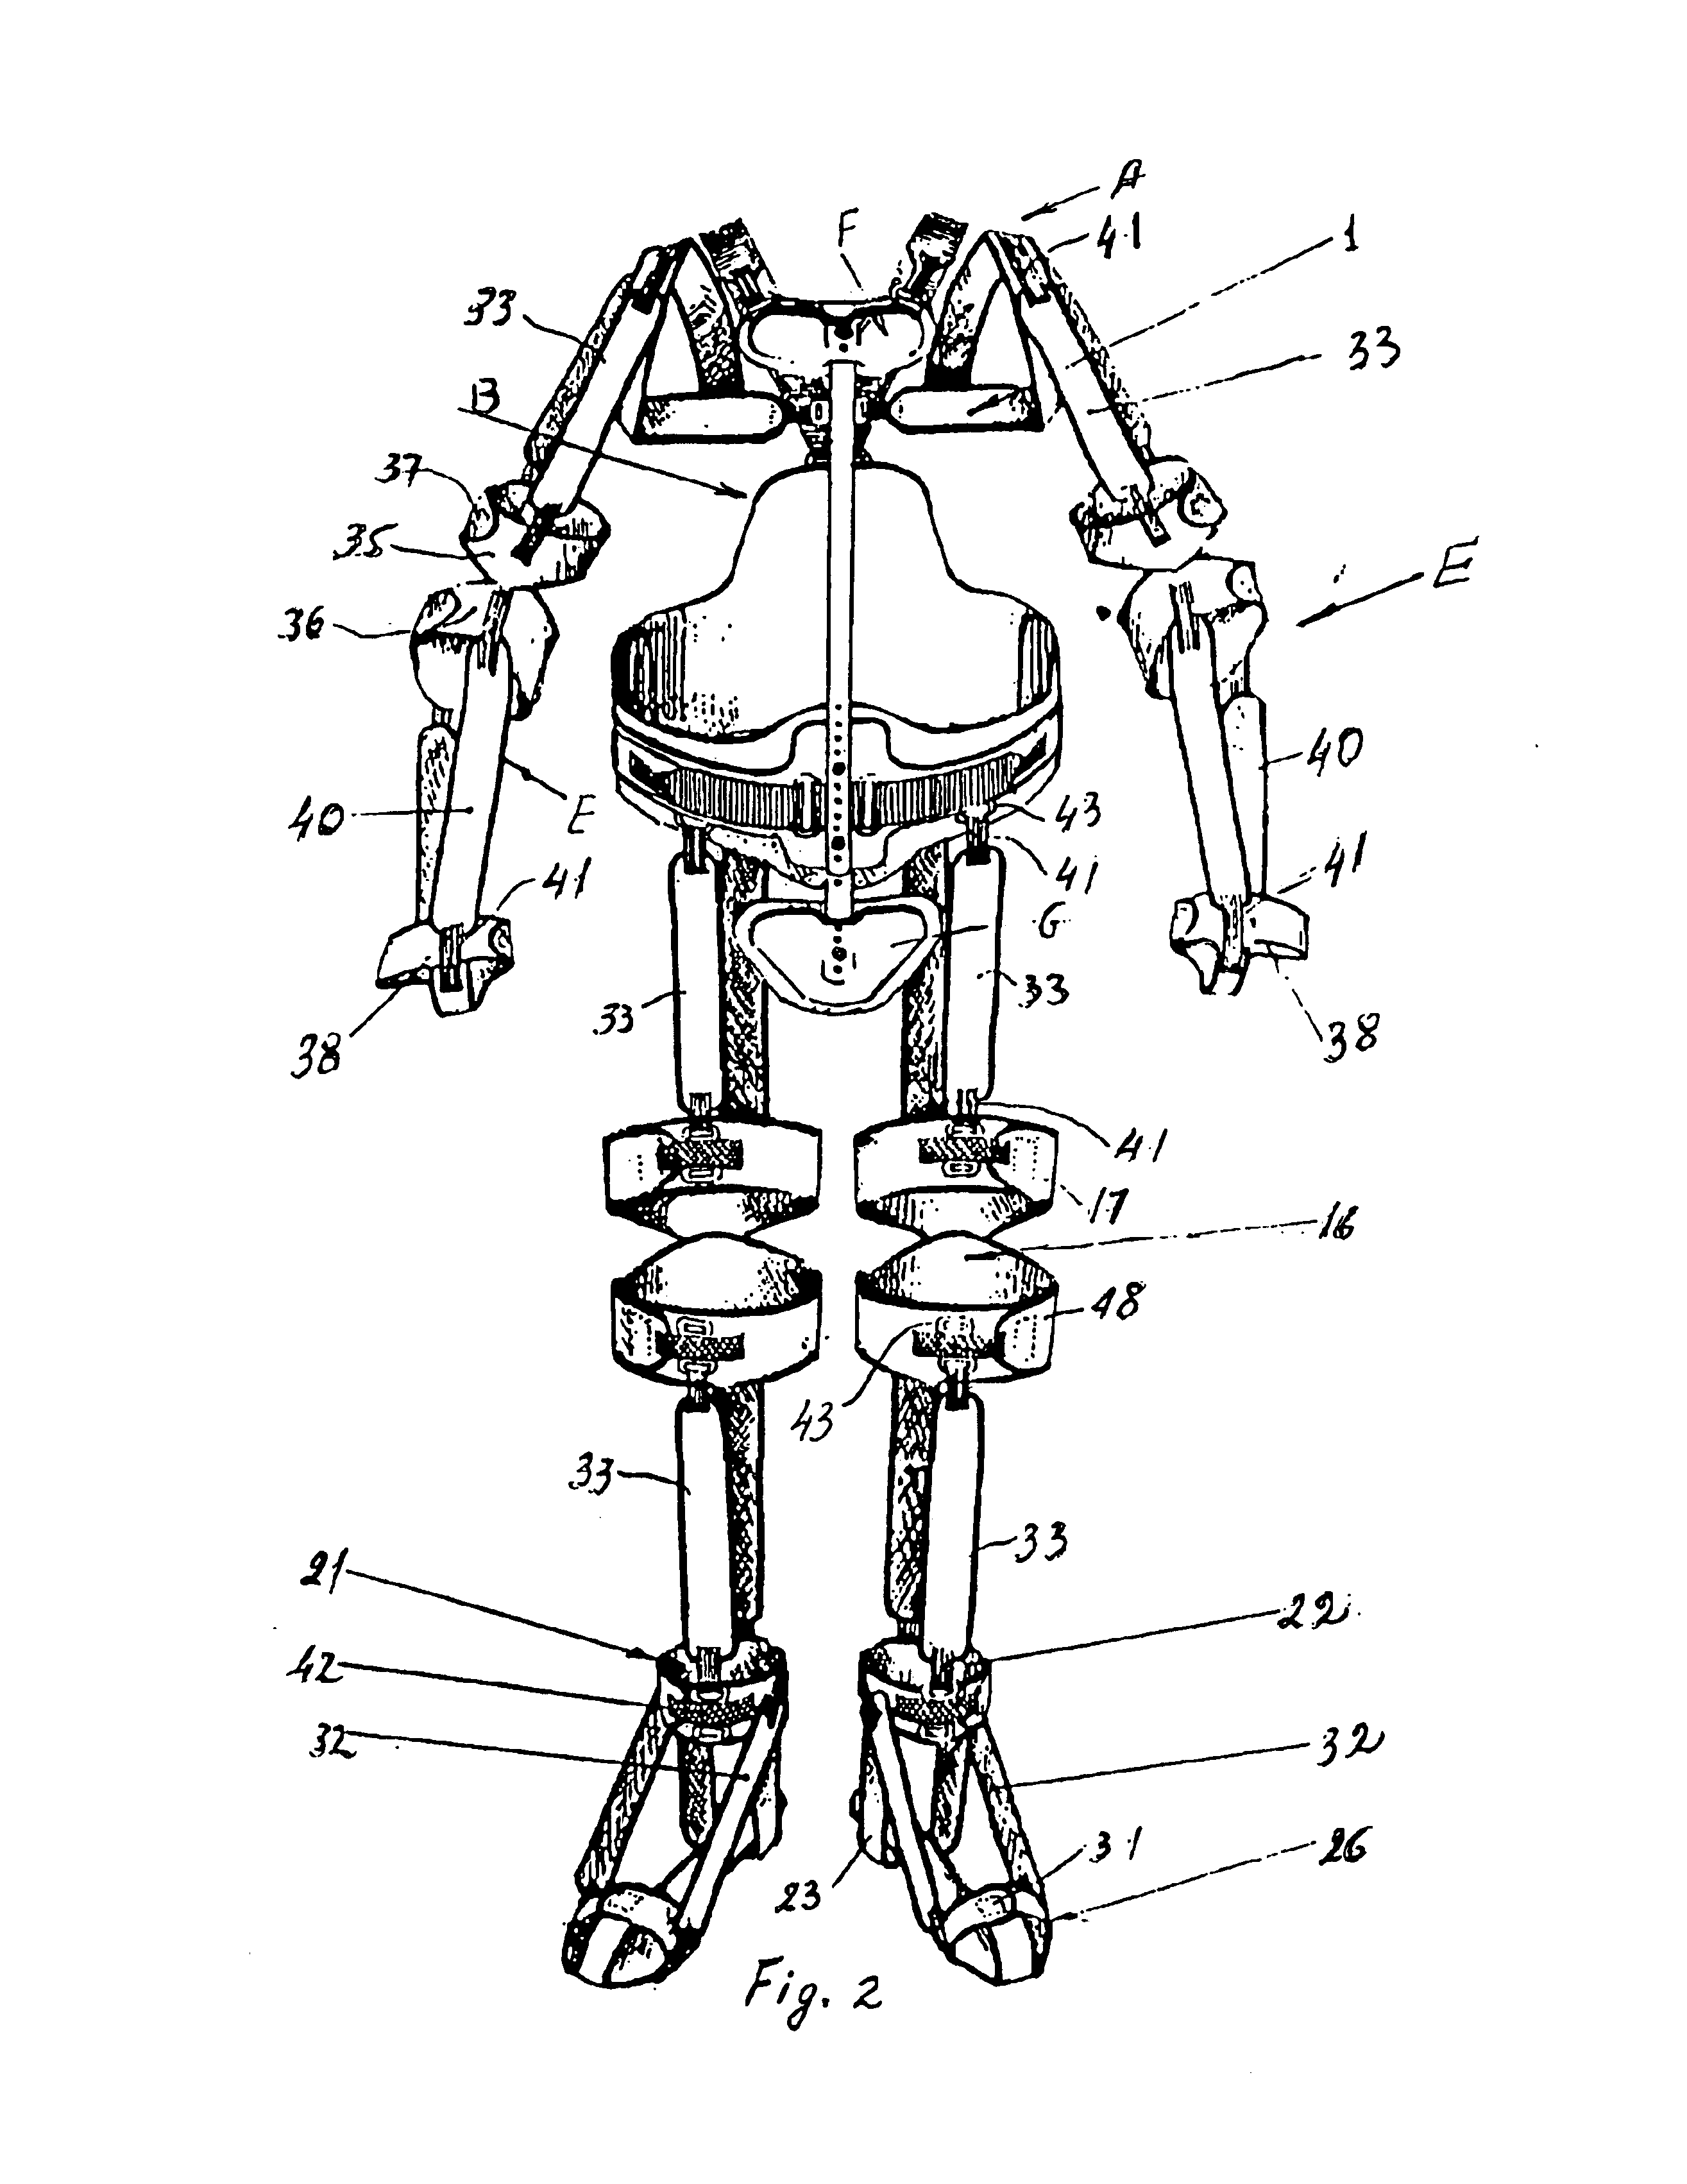 Device for users suffering from sequels of central nervous system and locomotrium affection of body